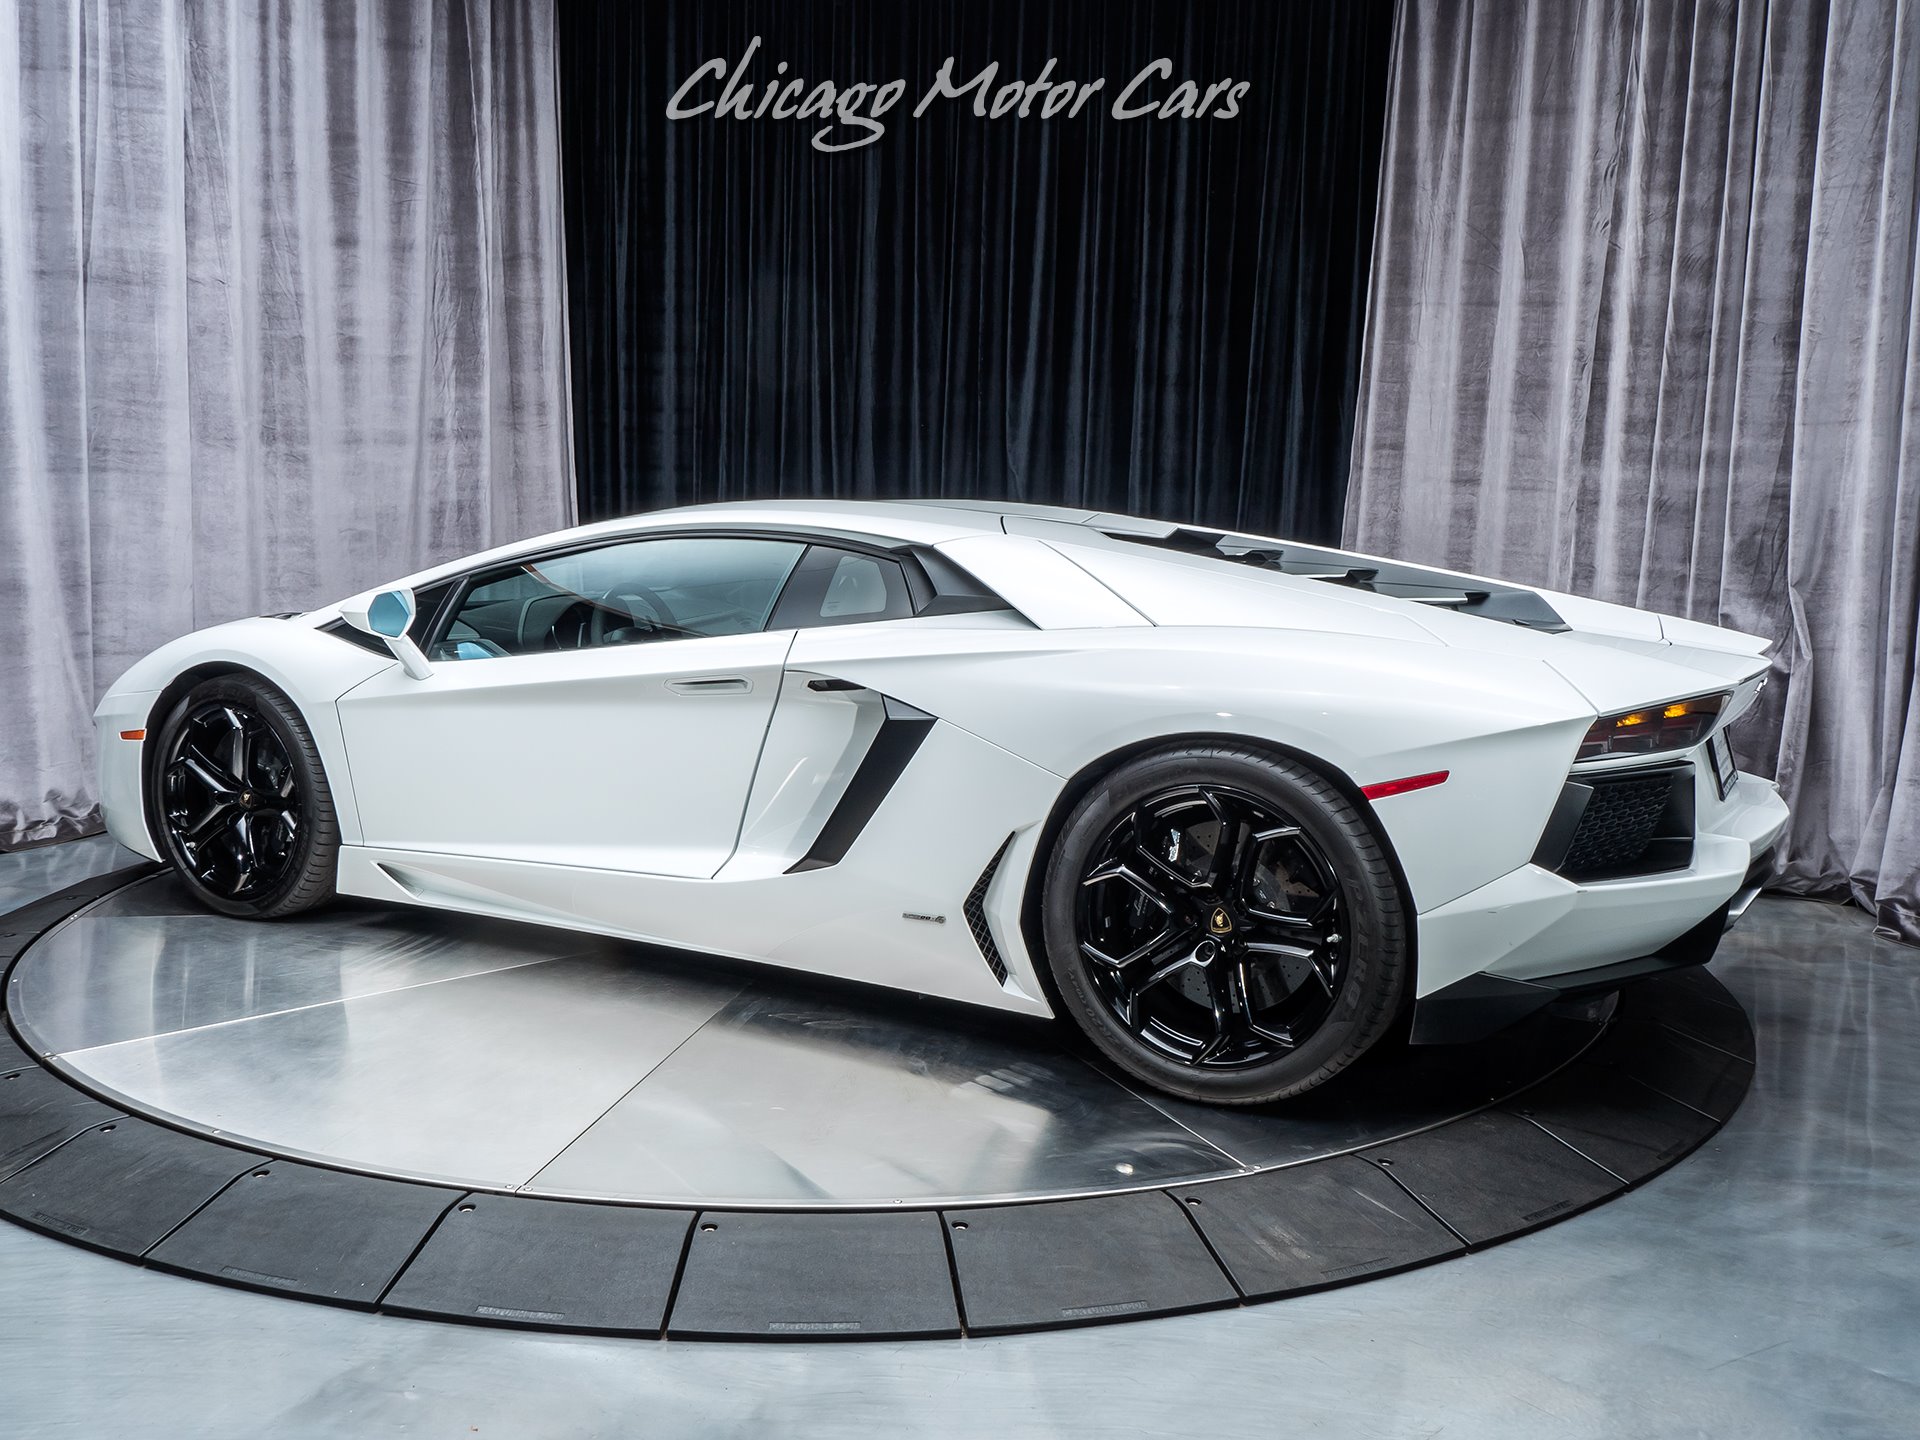 Used 2012 Aventador LP7004 Coupe For Sale (Special Pricing